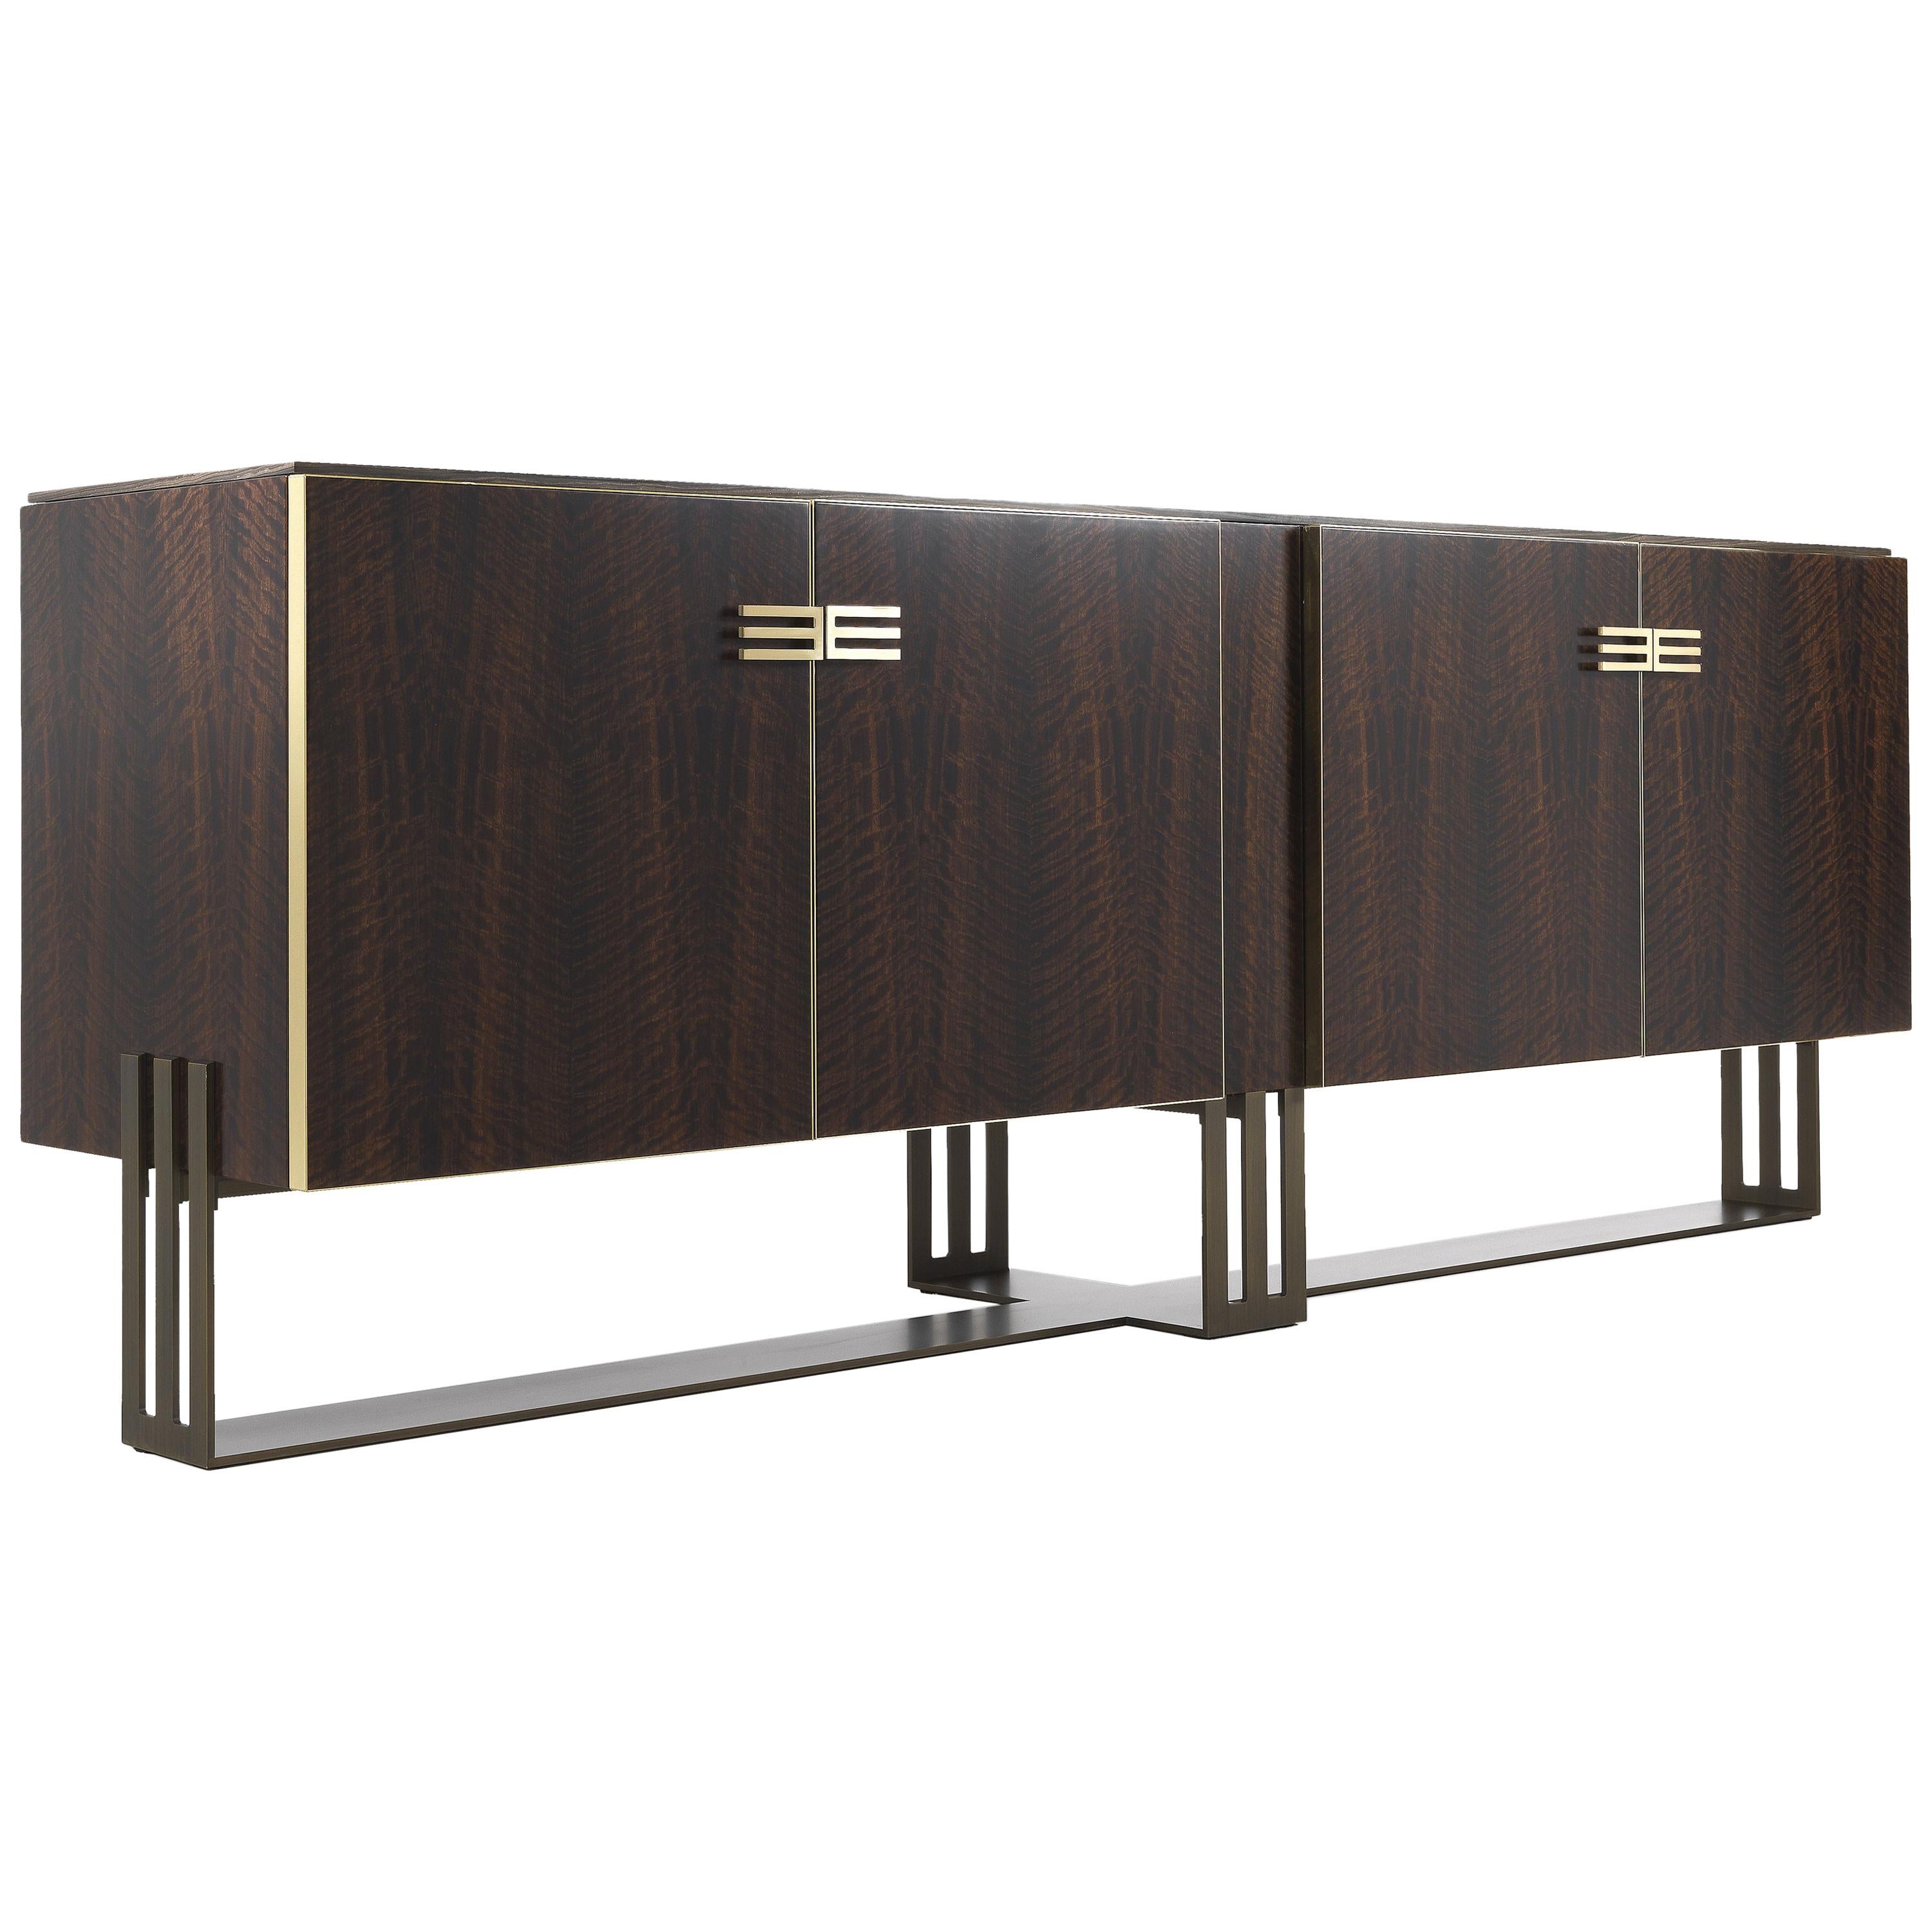 Featuring pure and uncluttered lines, Klee sideboard combines the choice of precious, luxurious materials with the simplicity of the design. The structure is in patinated bronze metal with sides covered with smoked eucalyptus frisé, while the inside